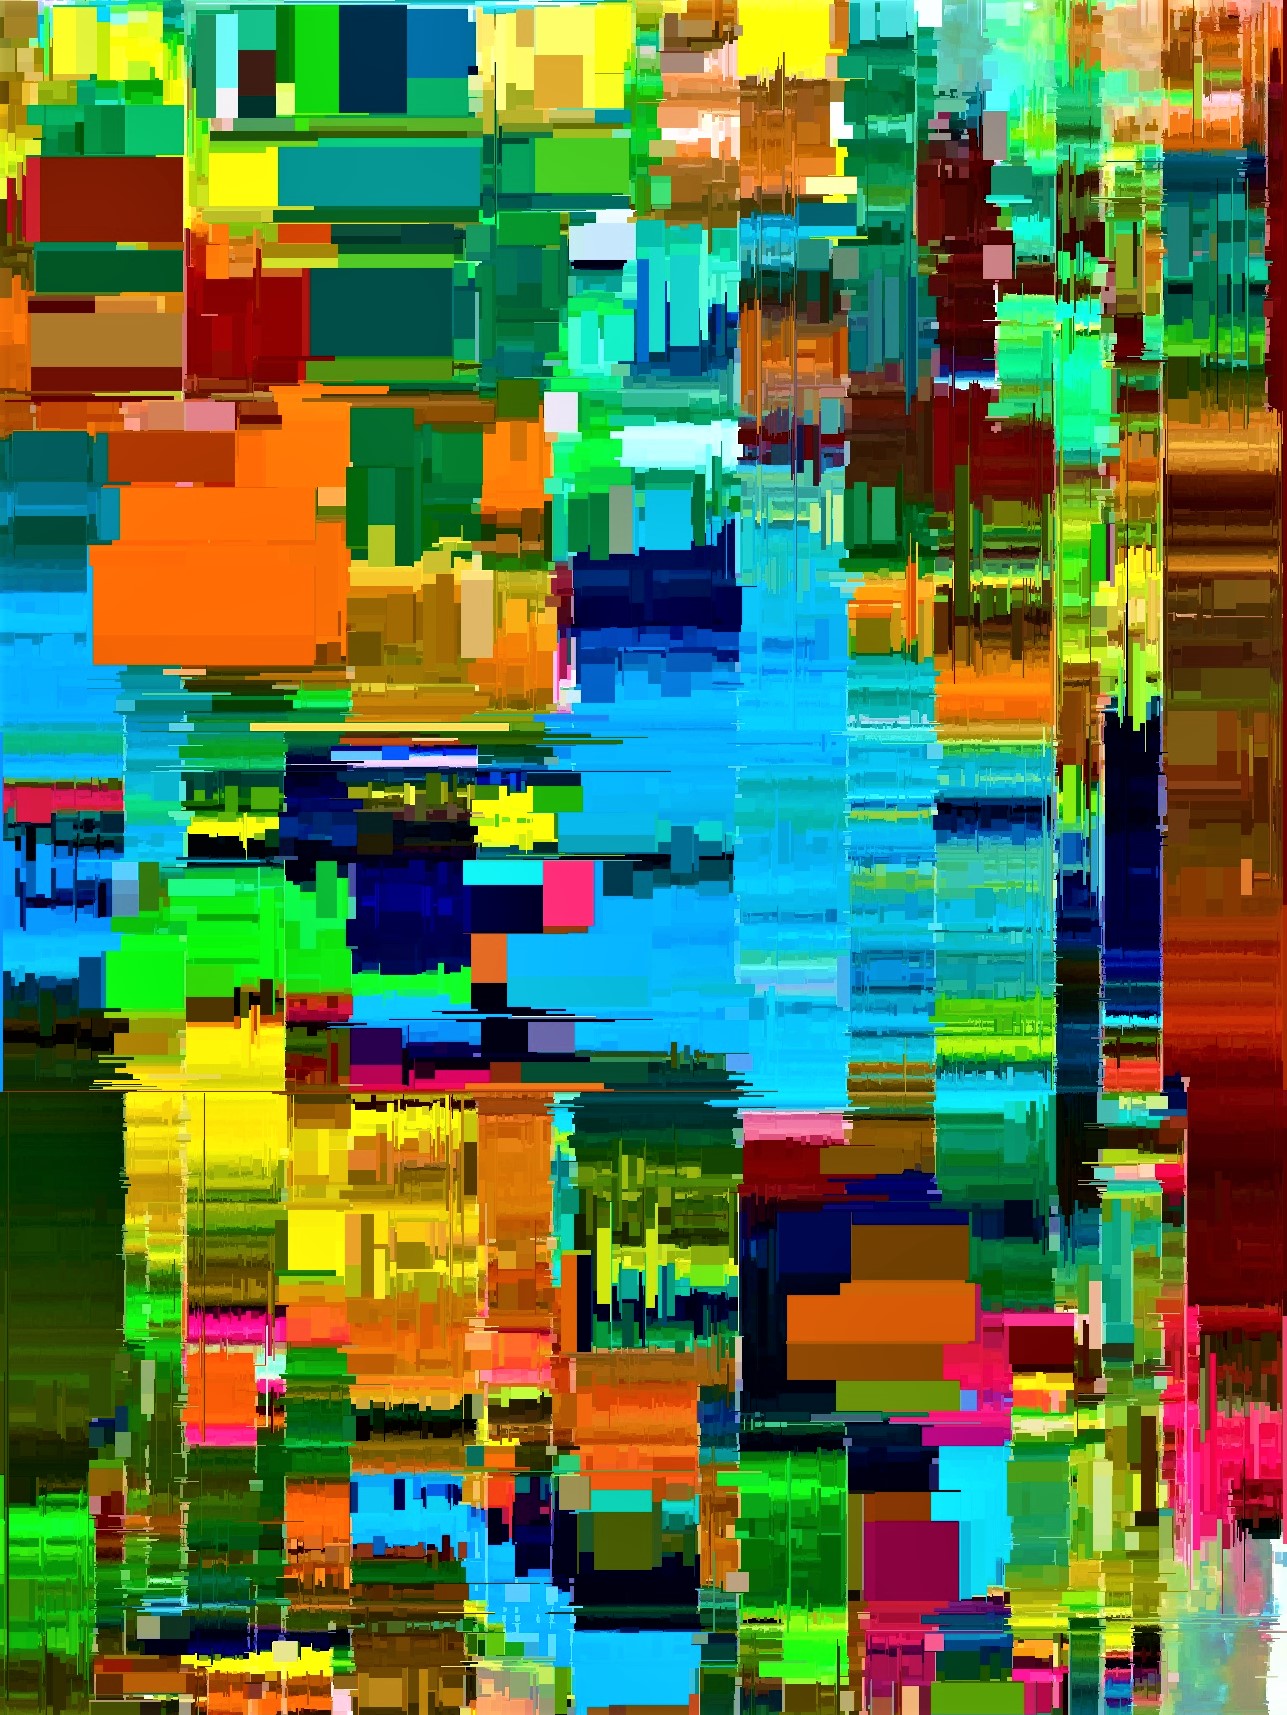 A Sea and Jungle Glitch - Painting #1 - Series #7